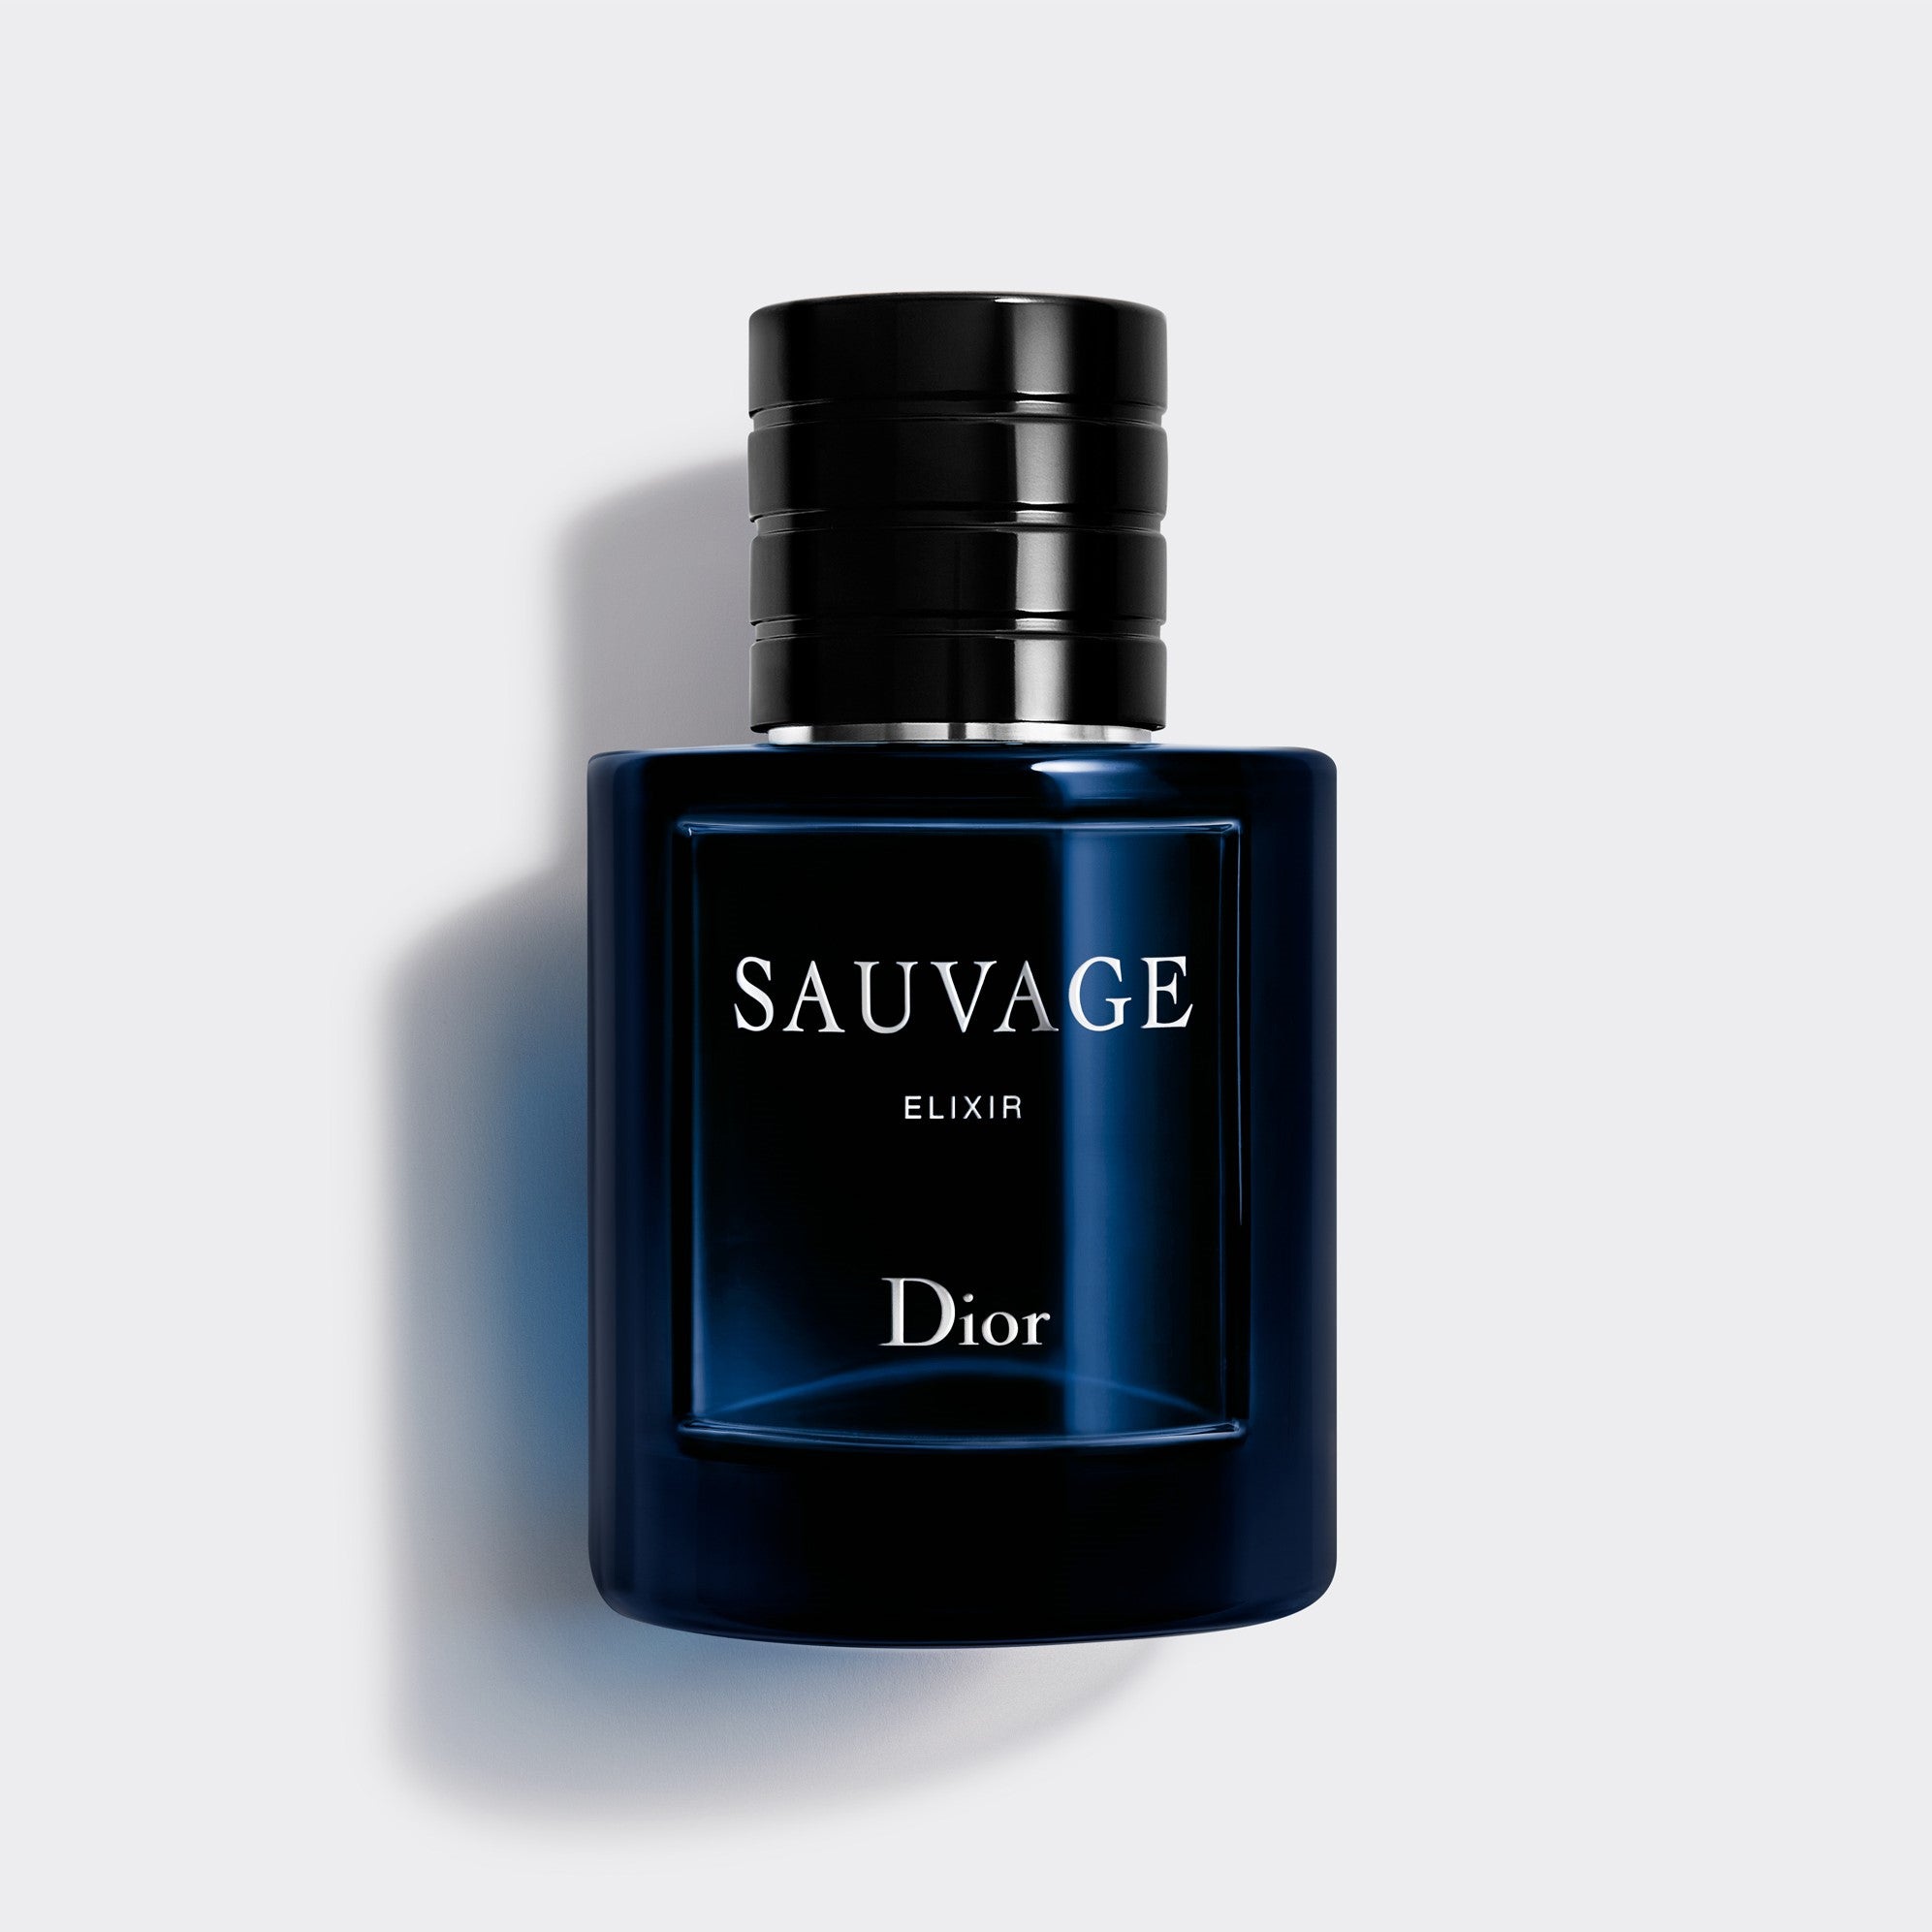 SAUVAGE ELIXIR ~ Elixir - Spicy, Fresh and Woody Notes